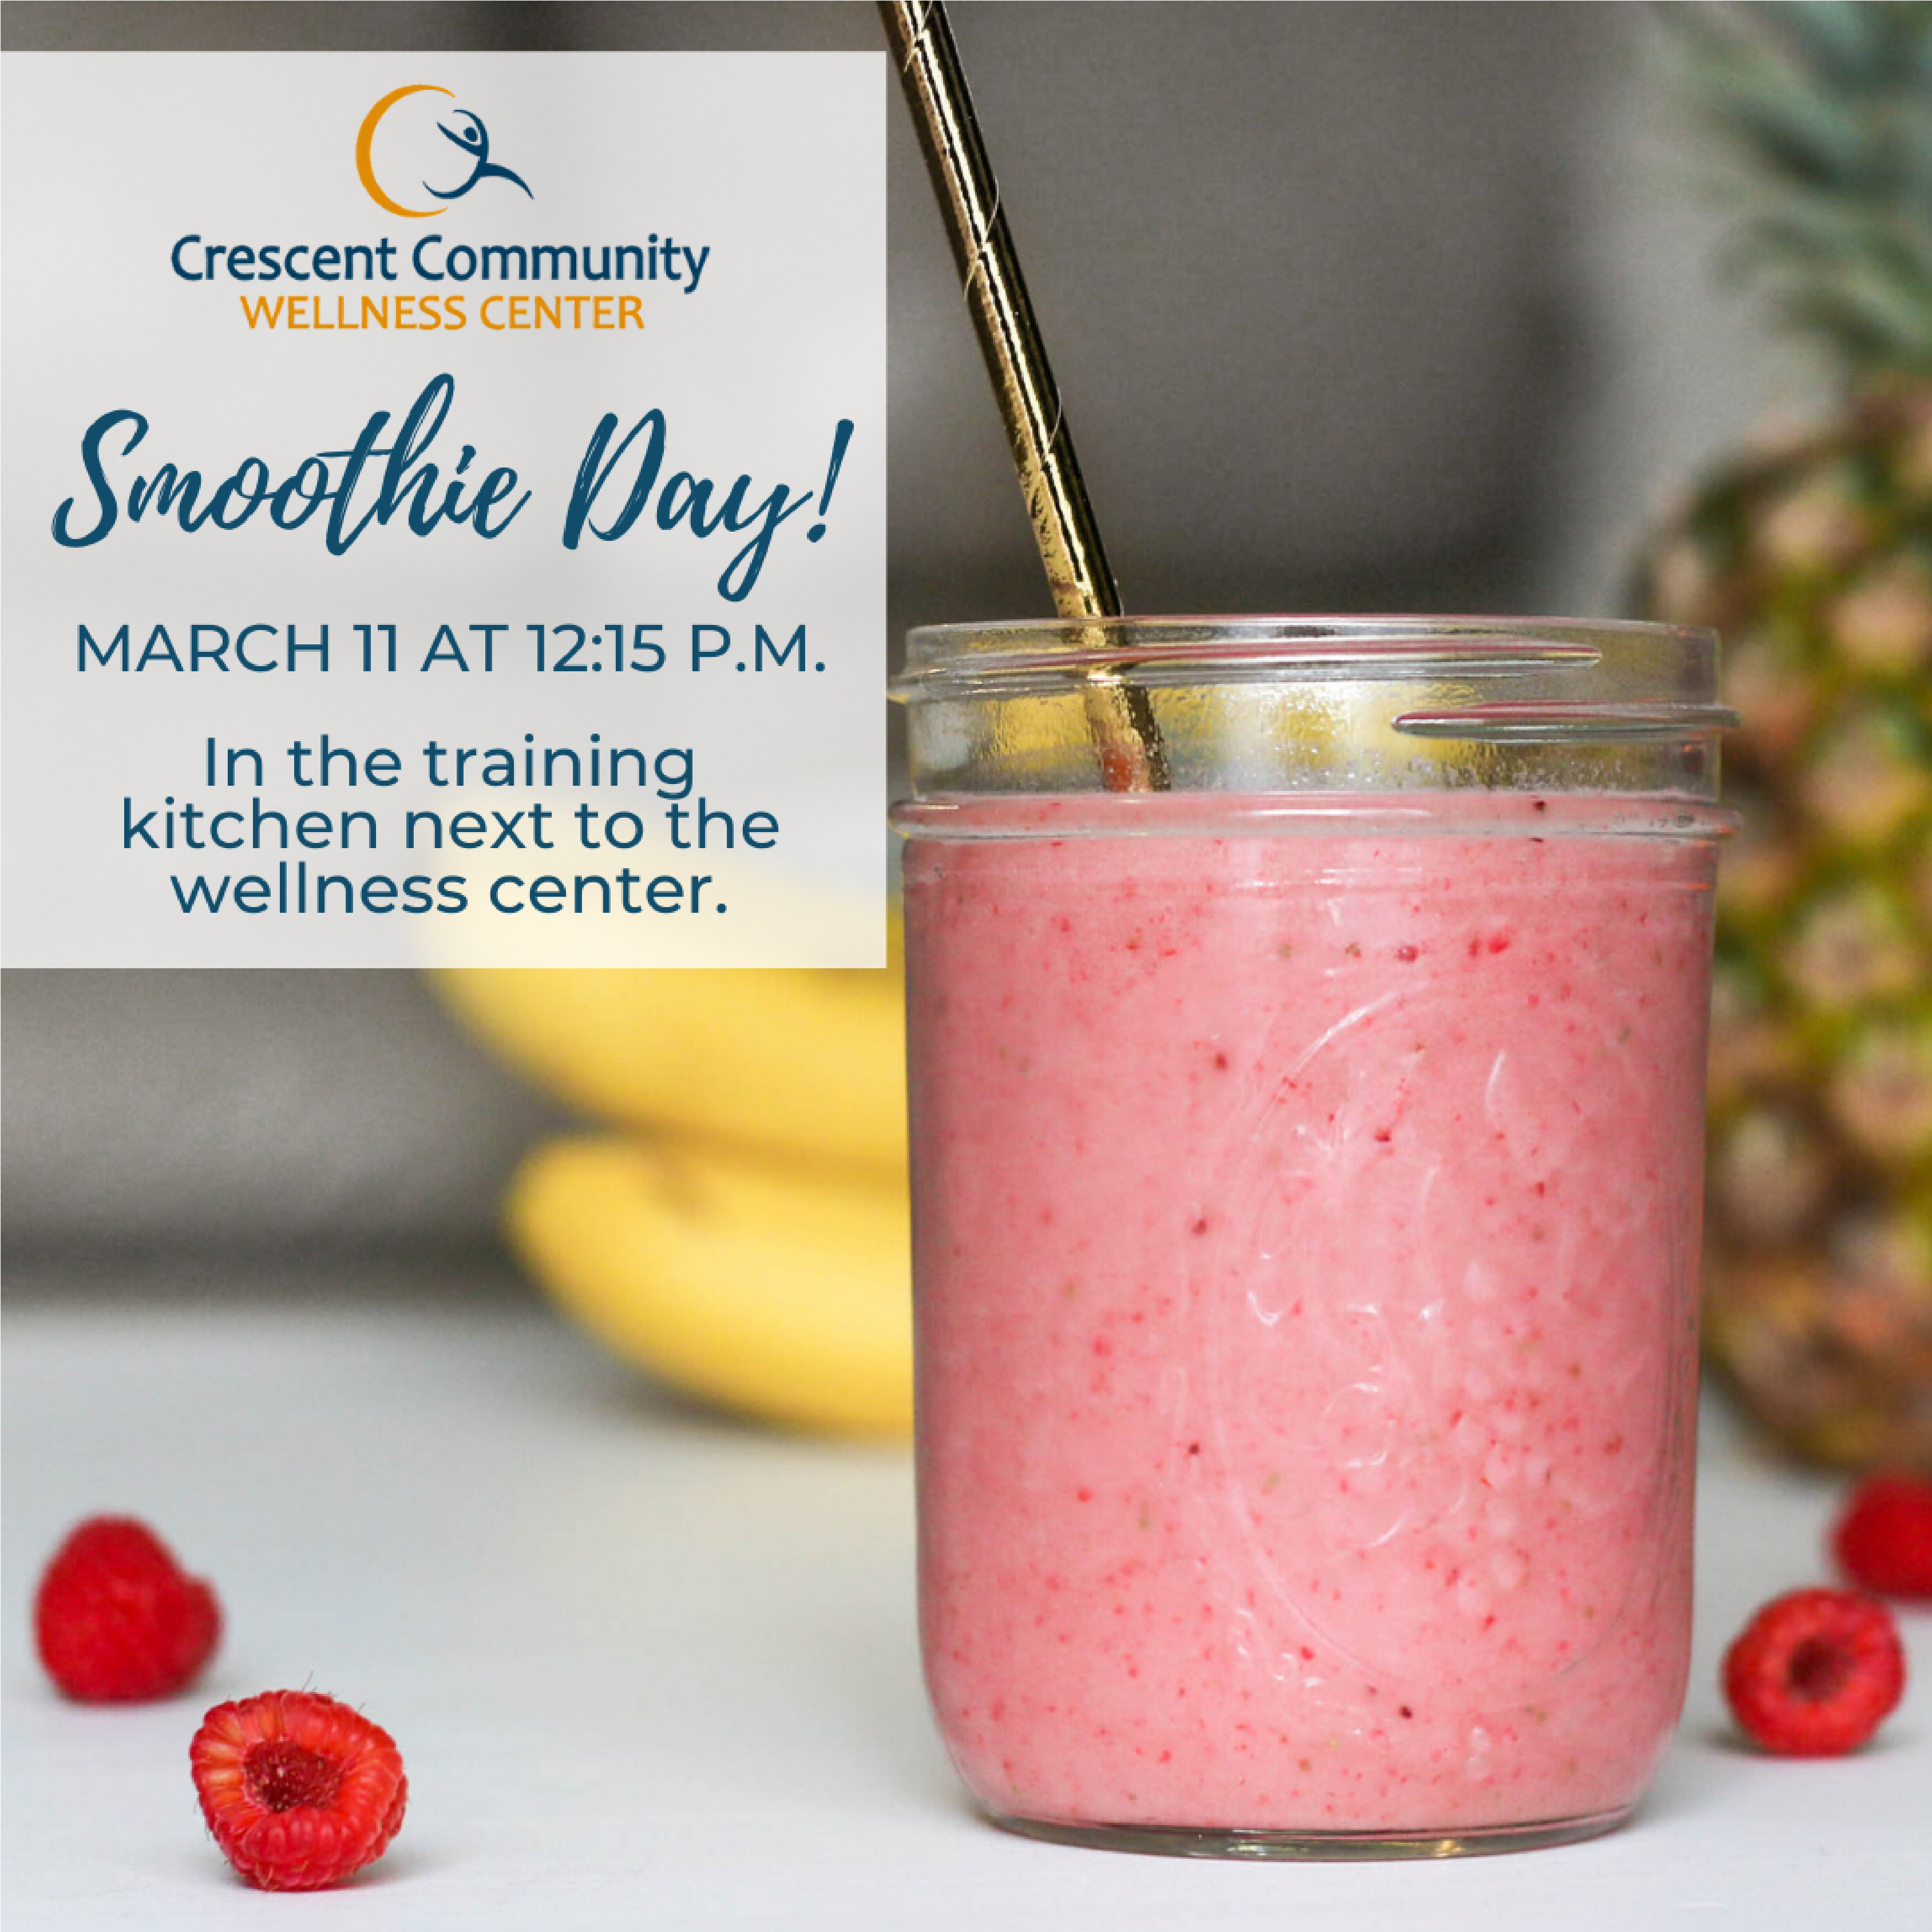 Join us for Smoothie Day! Newsroom Resources Crescent Community